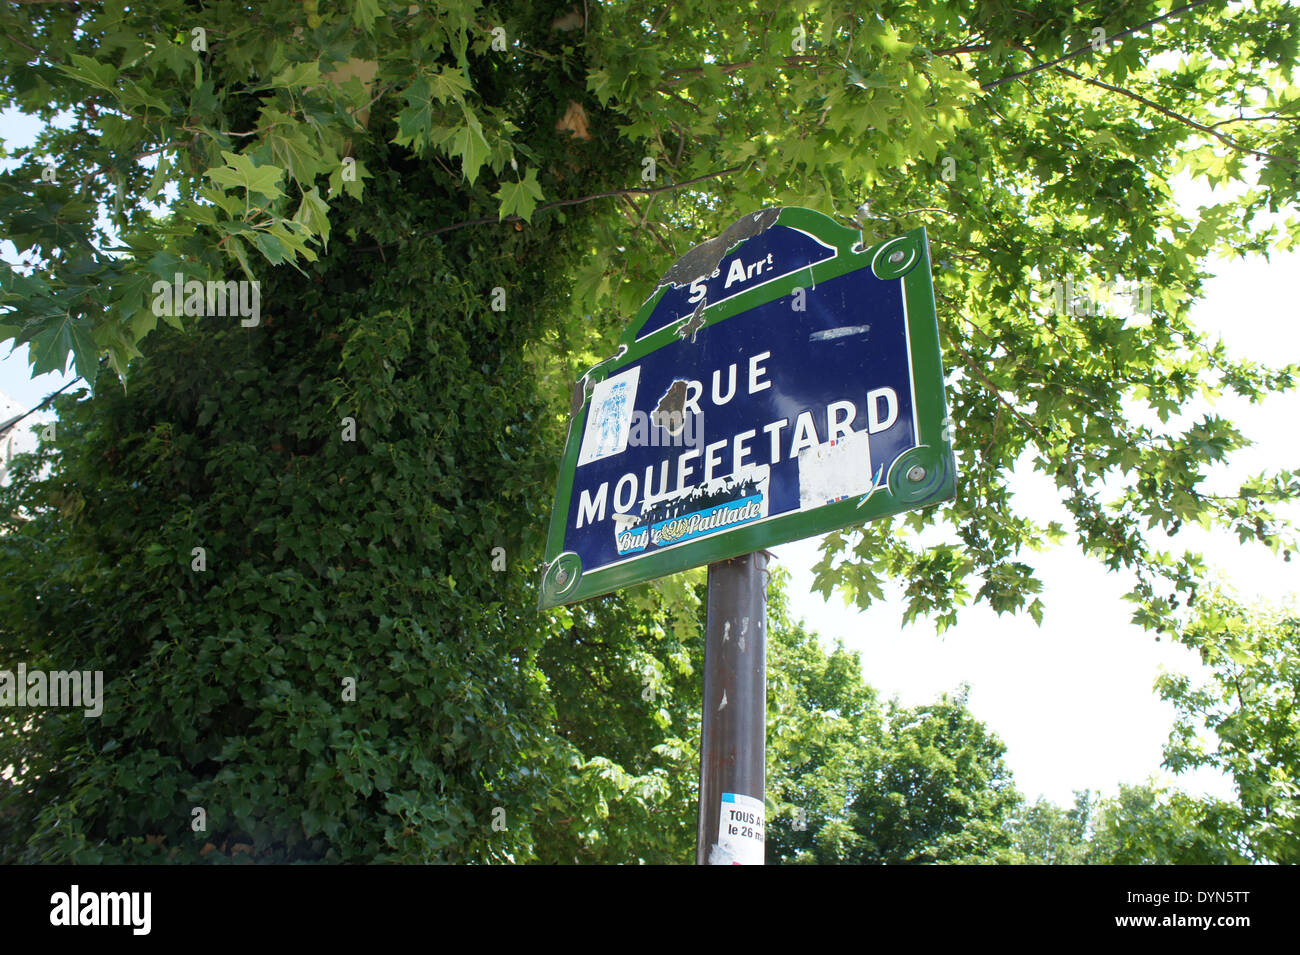 Road sign for Rue Mouffetard in Paris, France Stock Photo